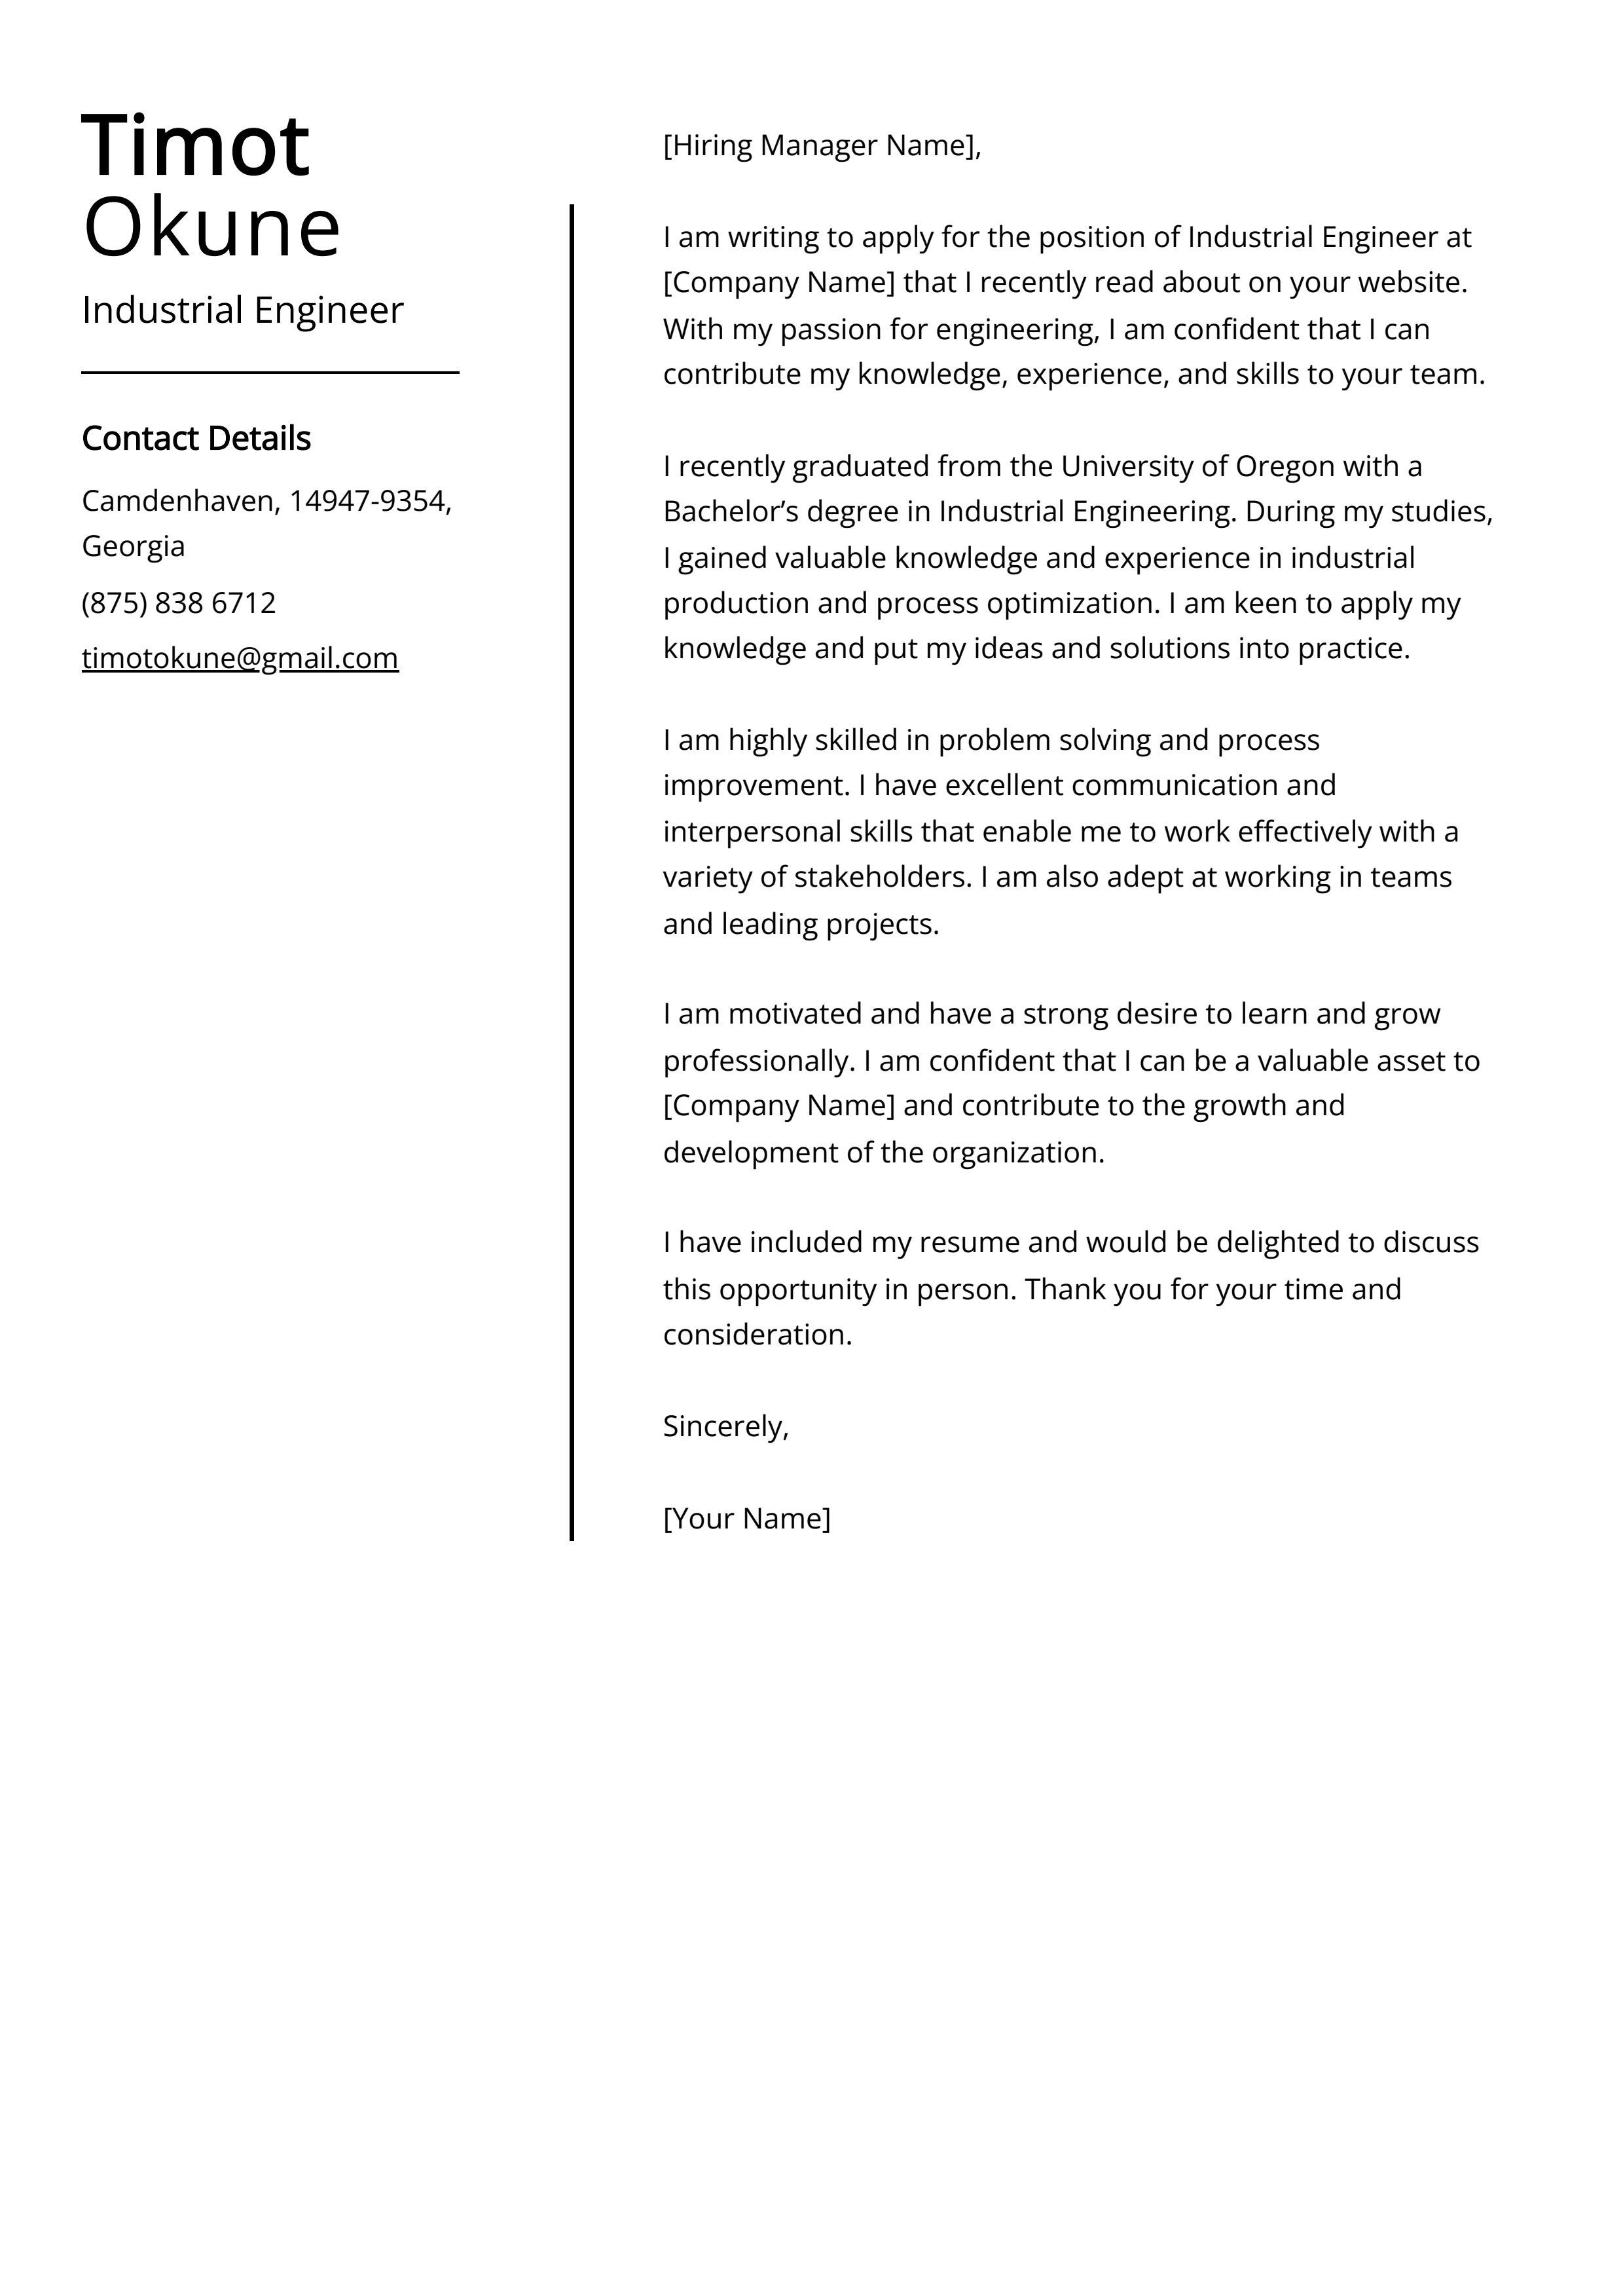 Industrial Engineer Cover Letter Example